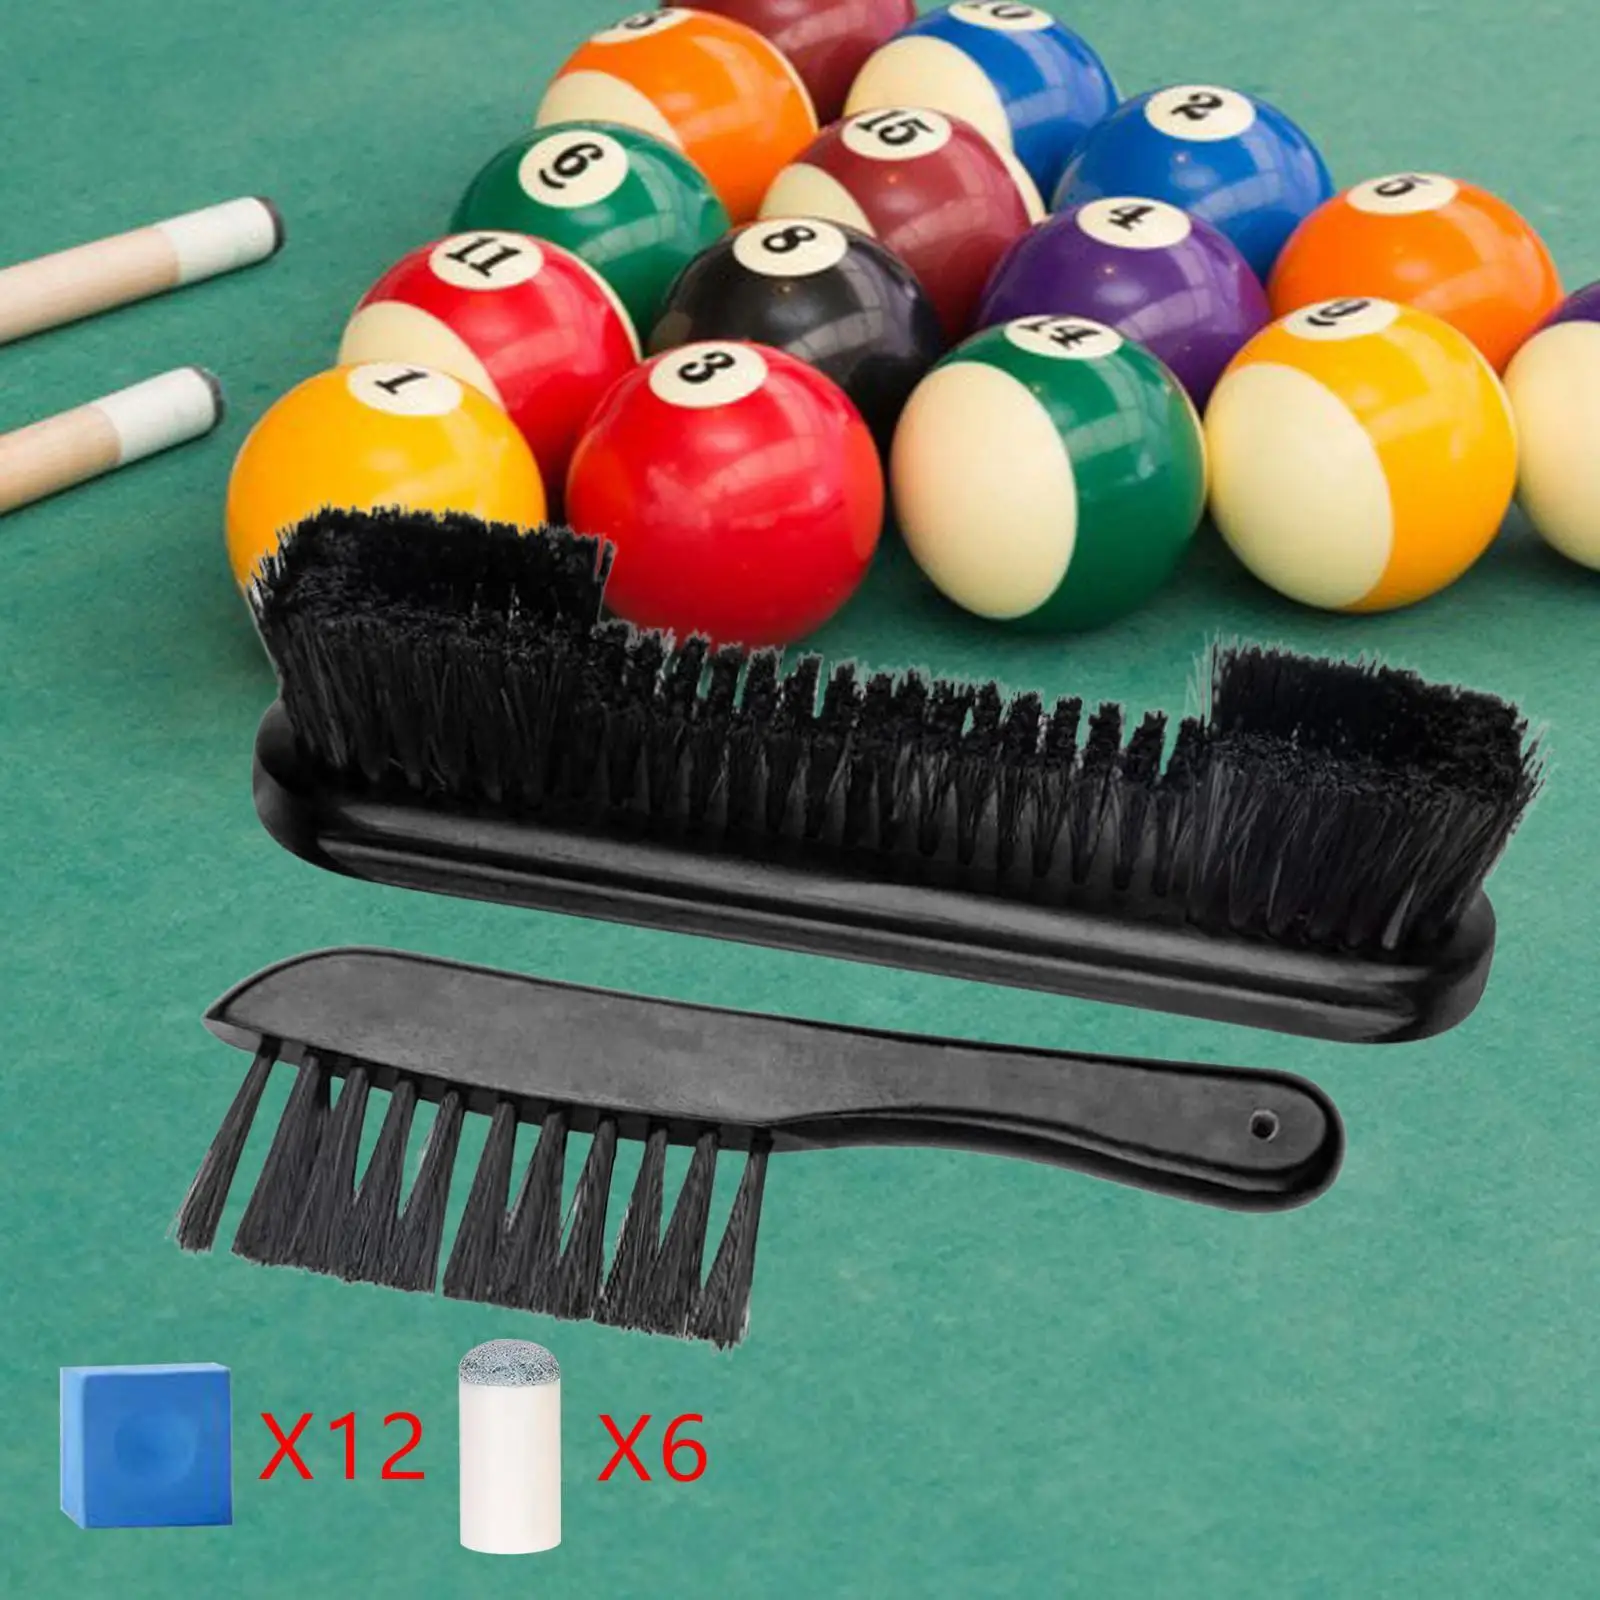 Billiards Brush Comfortable Gripping Portable Wood Handle Slip on Pool Cue Tips Replacements Billiards Table Cleaning Tool